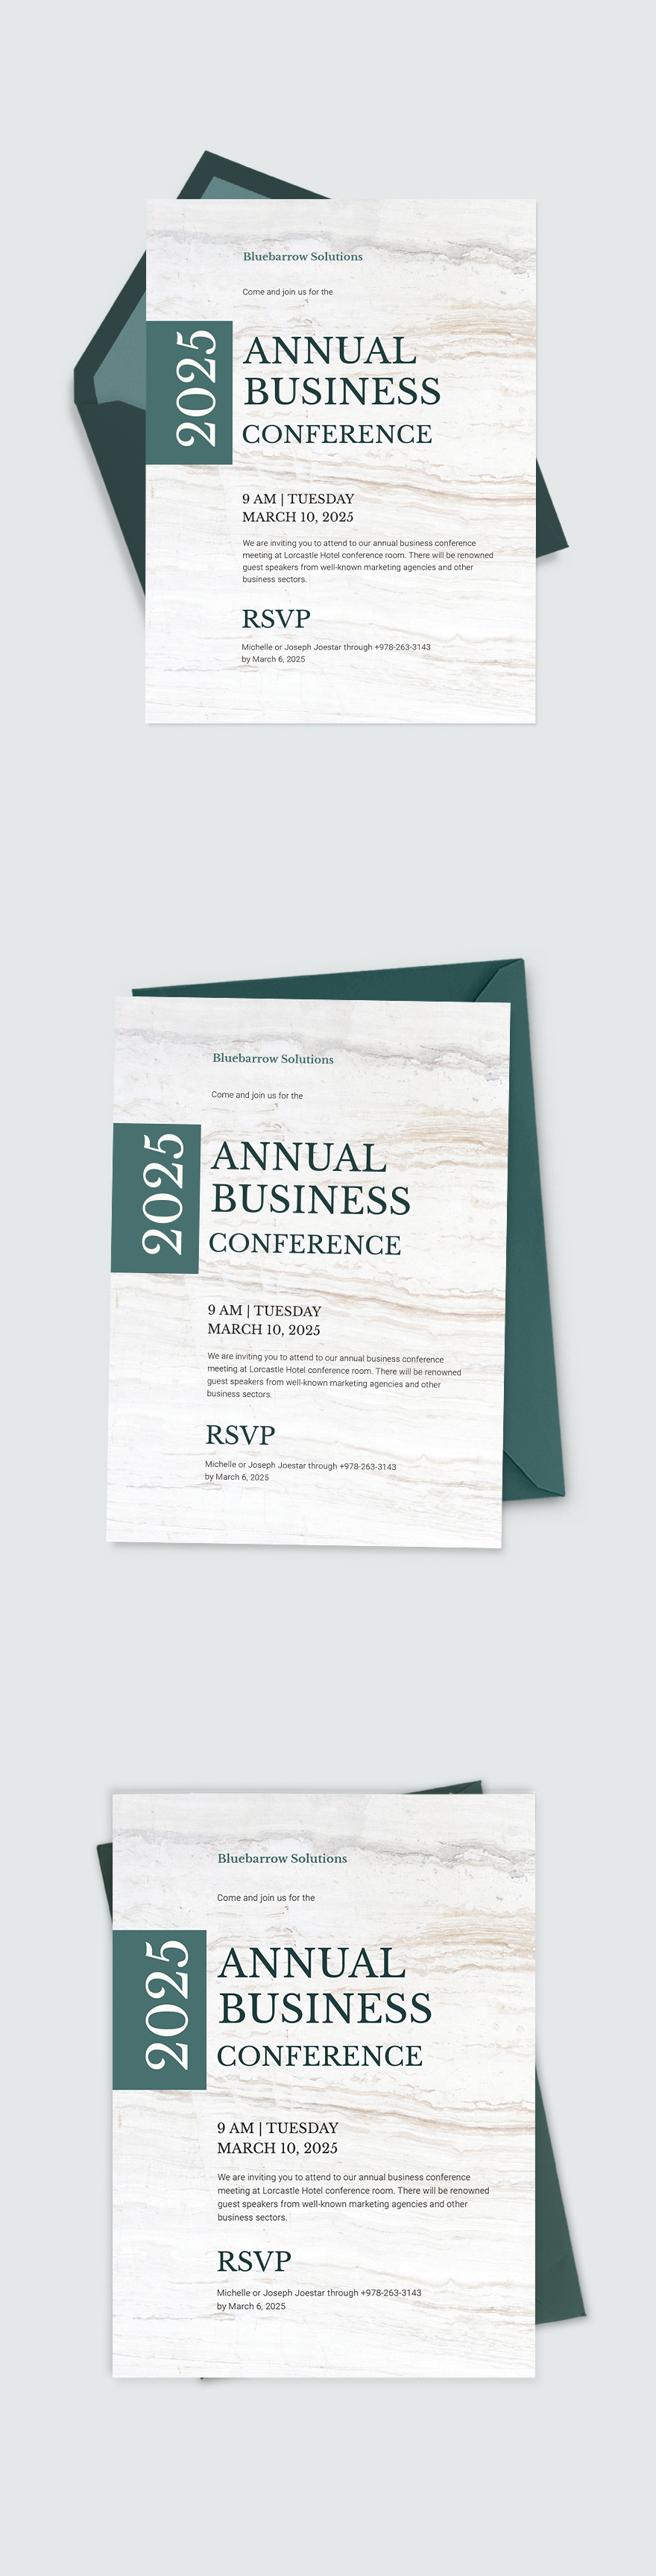 Business Conference Invitation Template